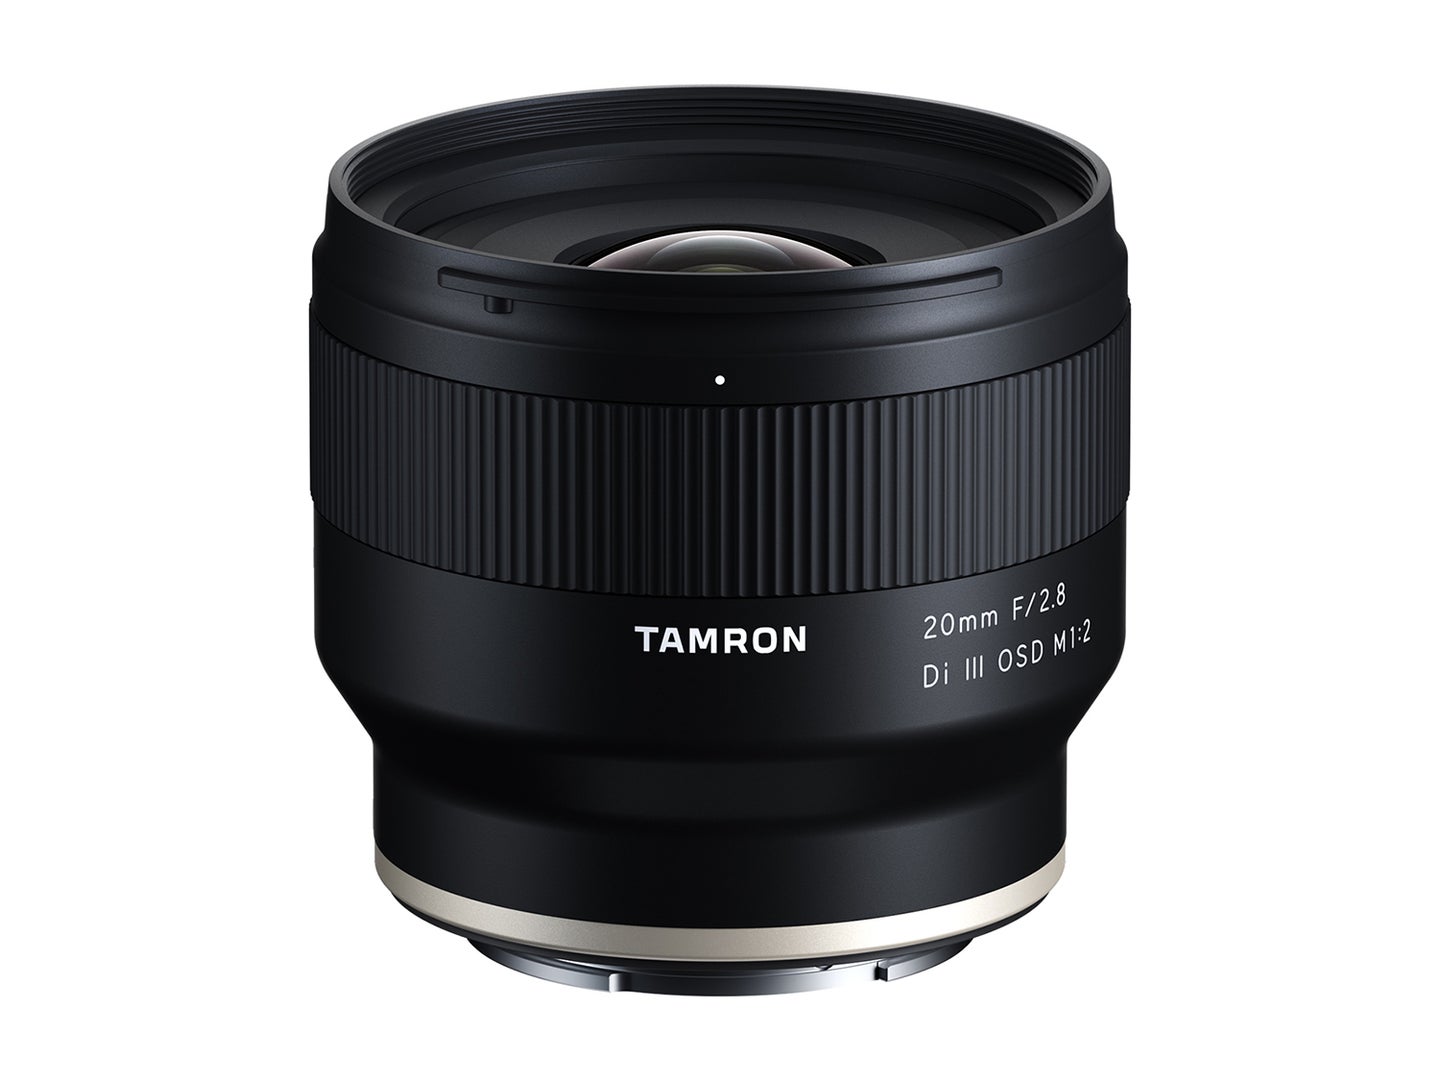 Tamron 20mm F/2.8 lens for Sony cameras